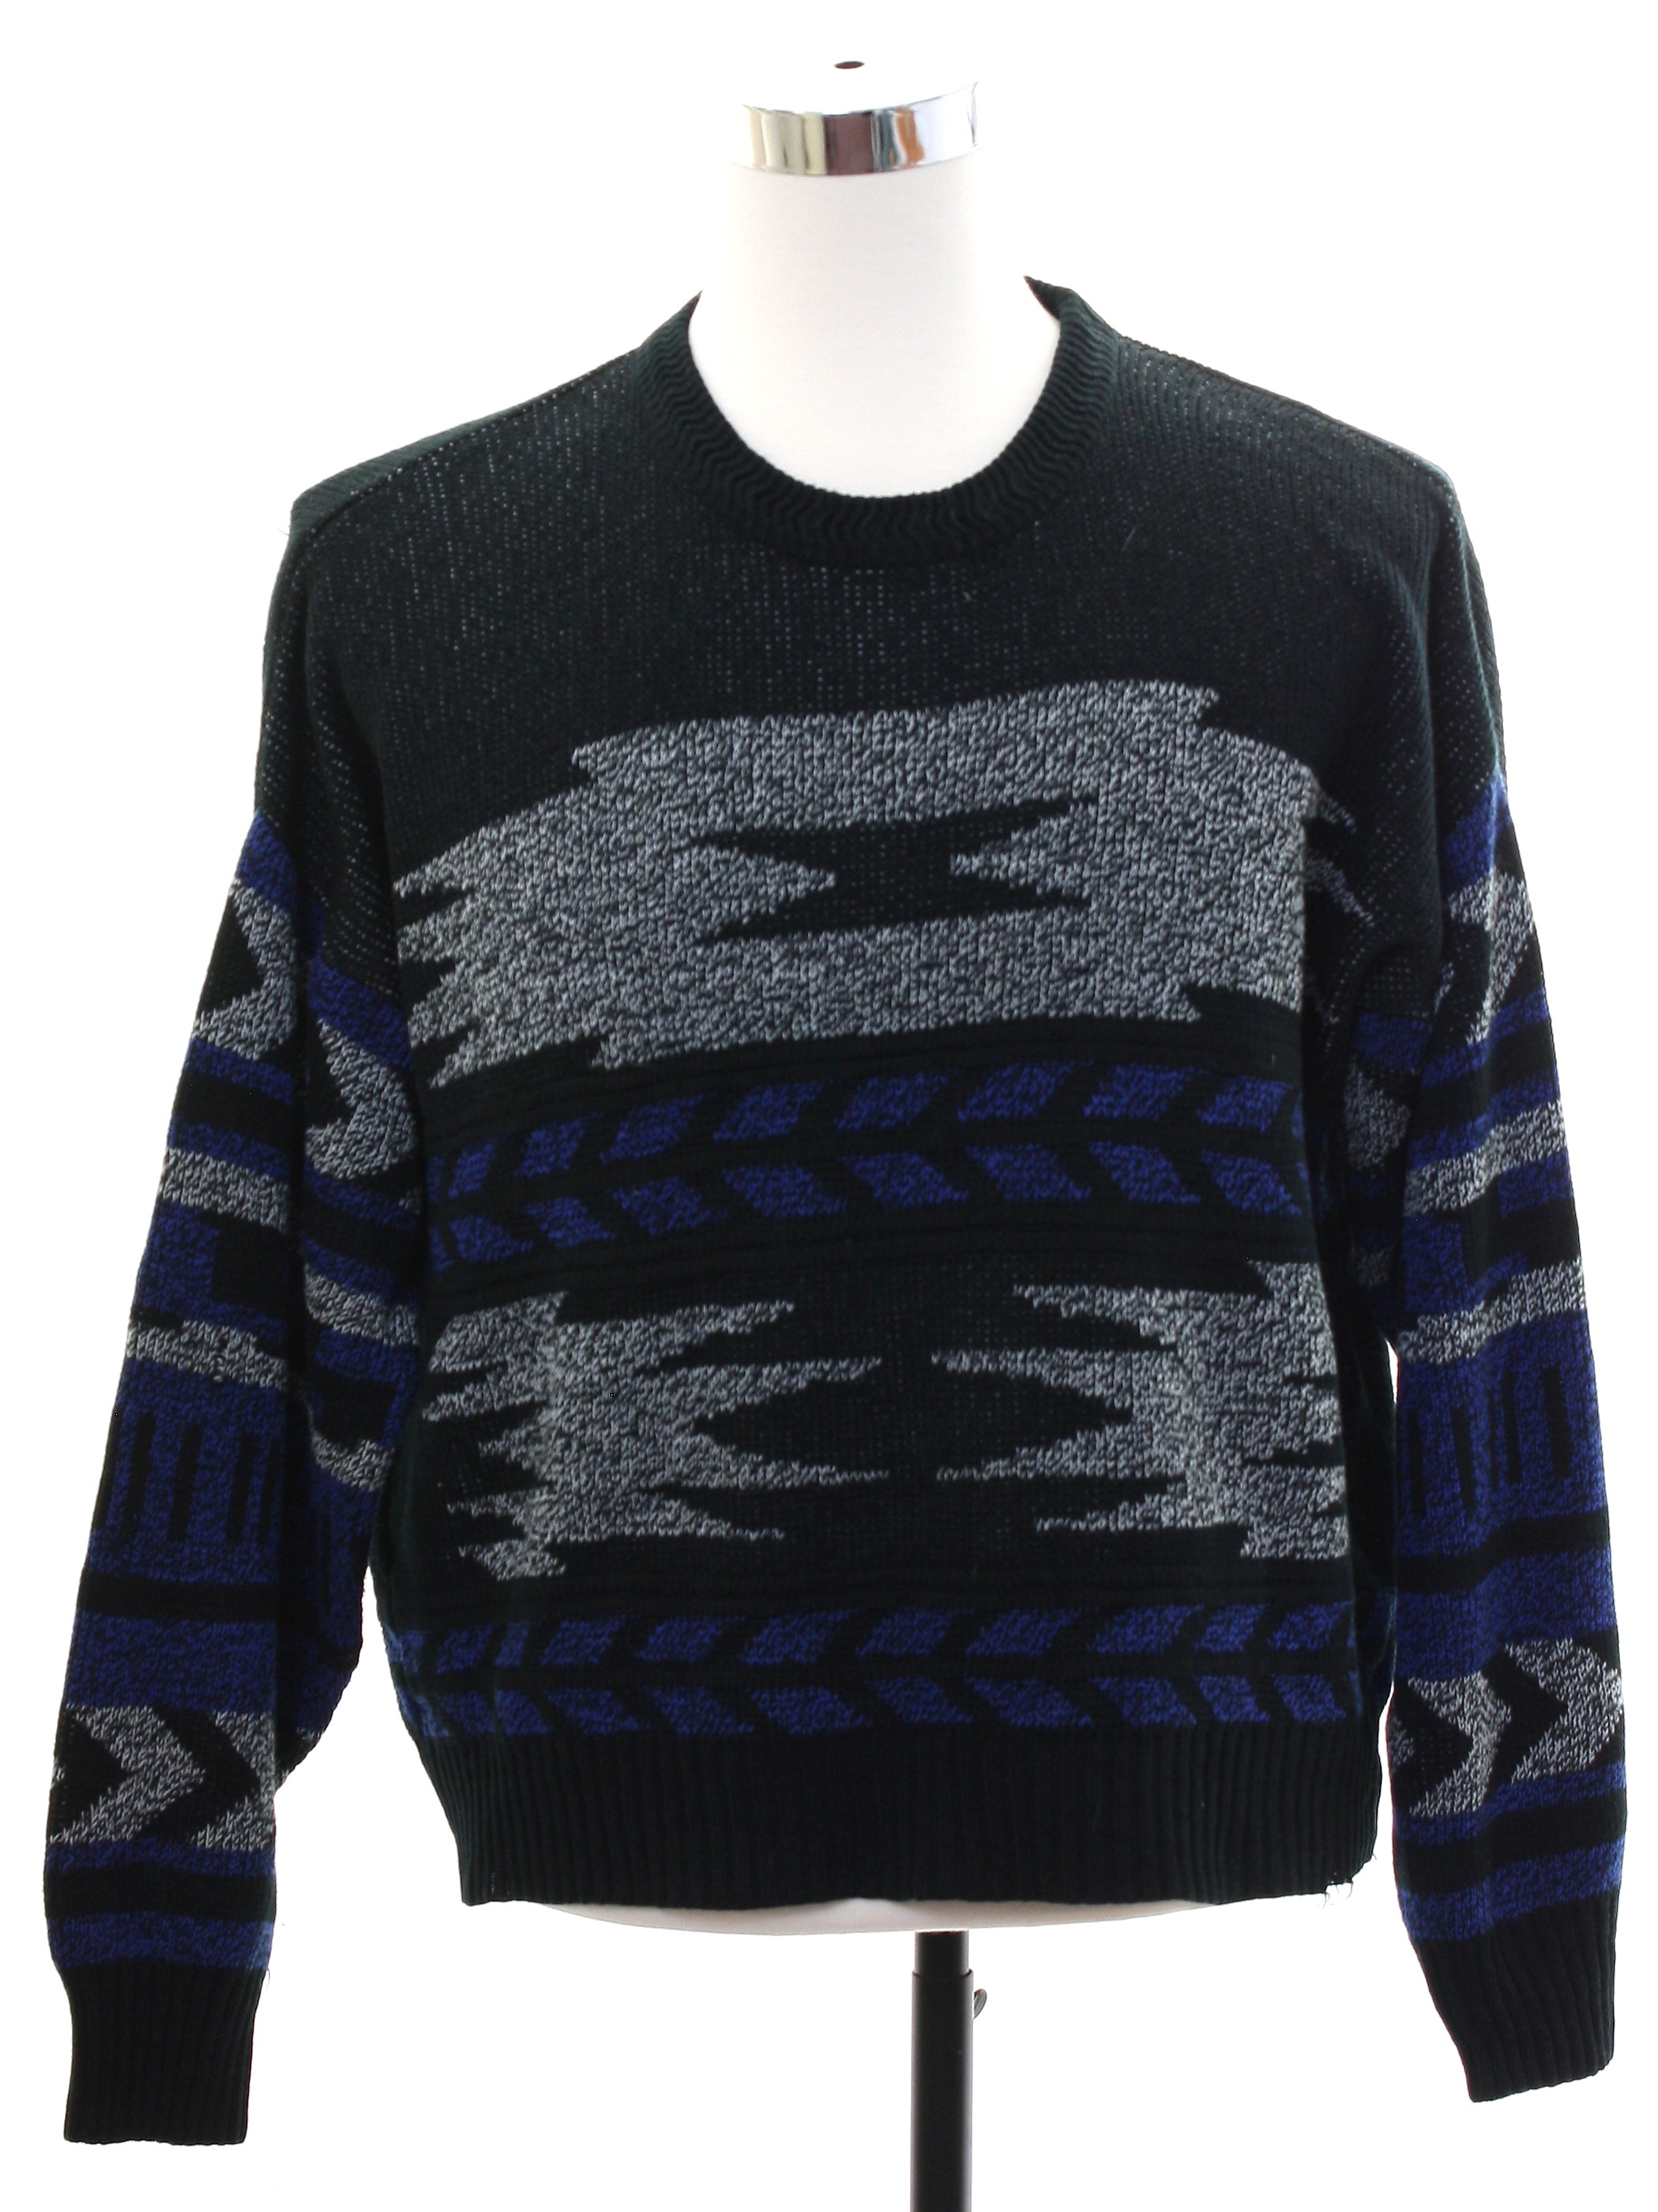 80s Retro Sweater: 80s -Expressions- Mens black background acrylic ...